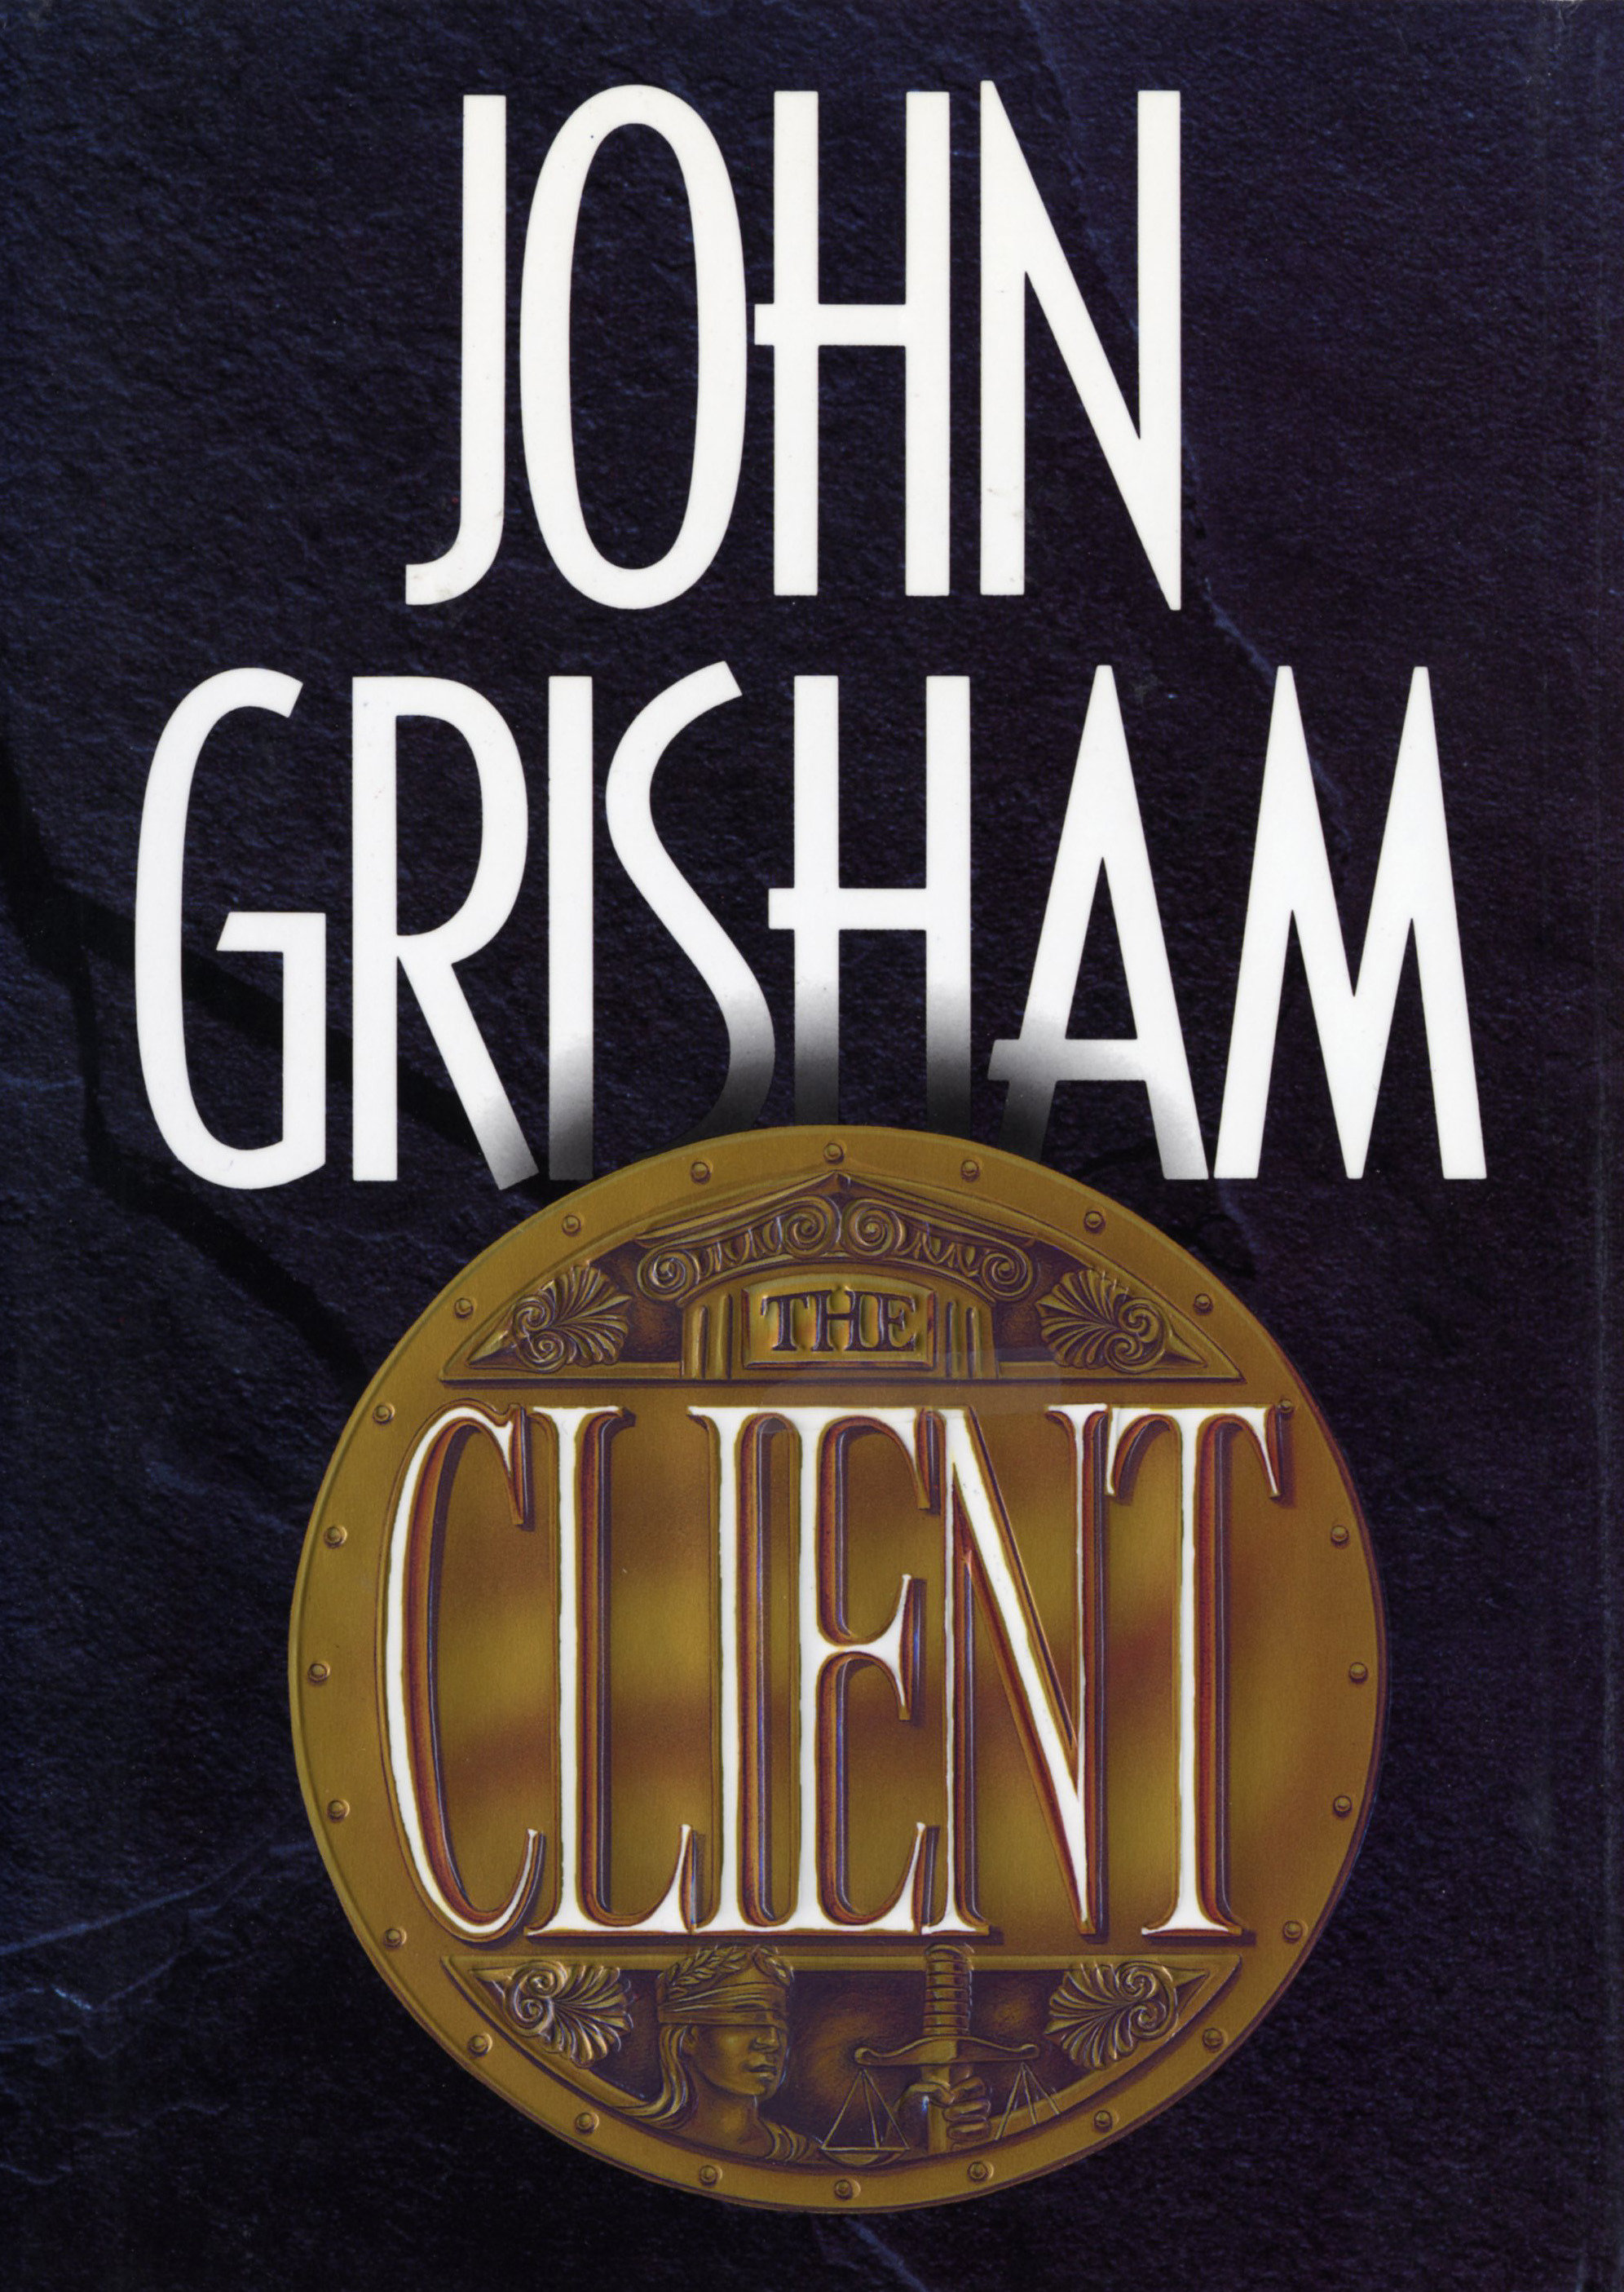 The Client (Hardcover Book)